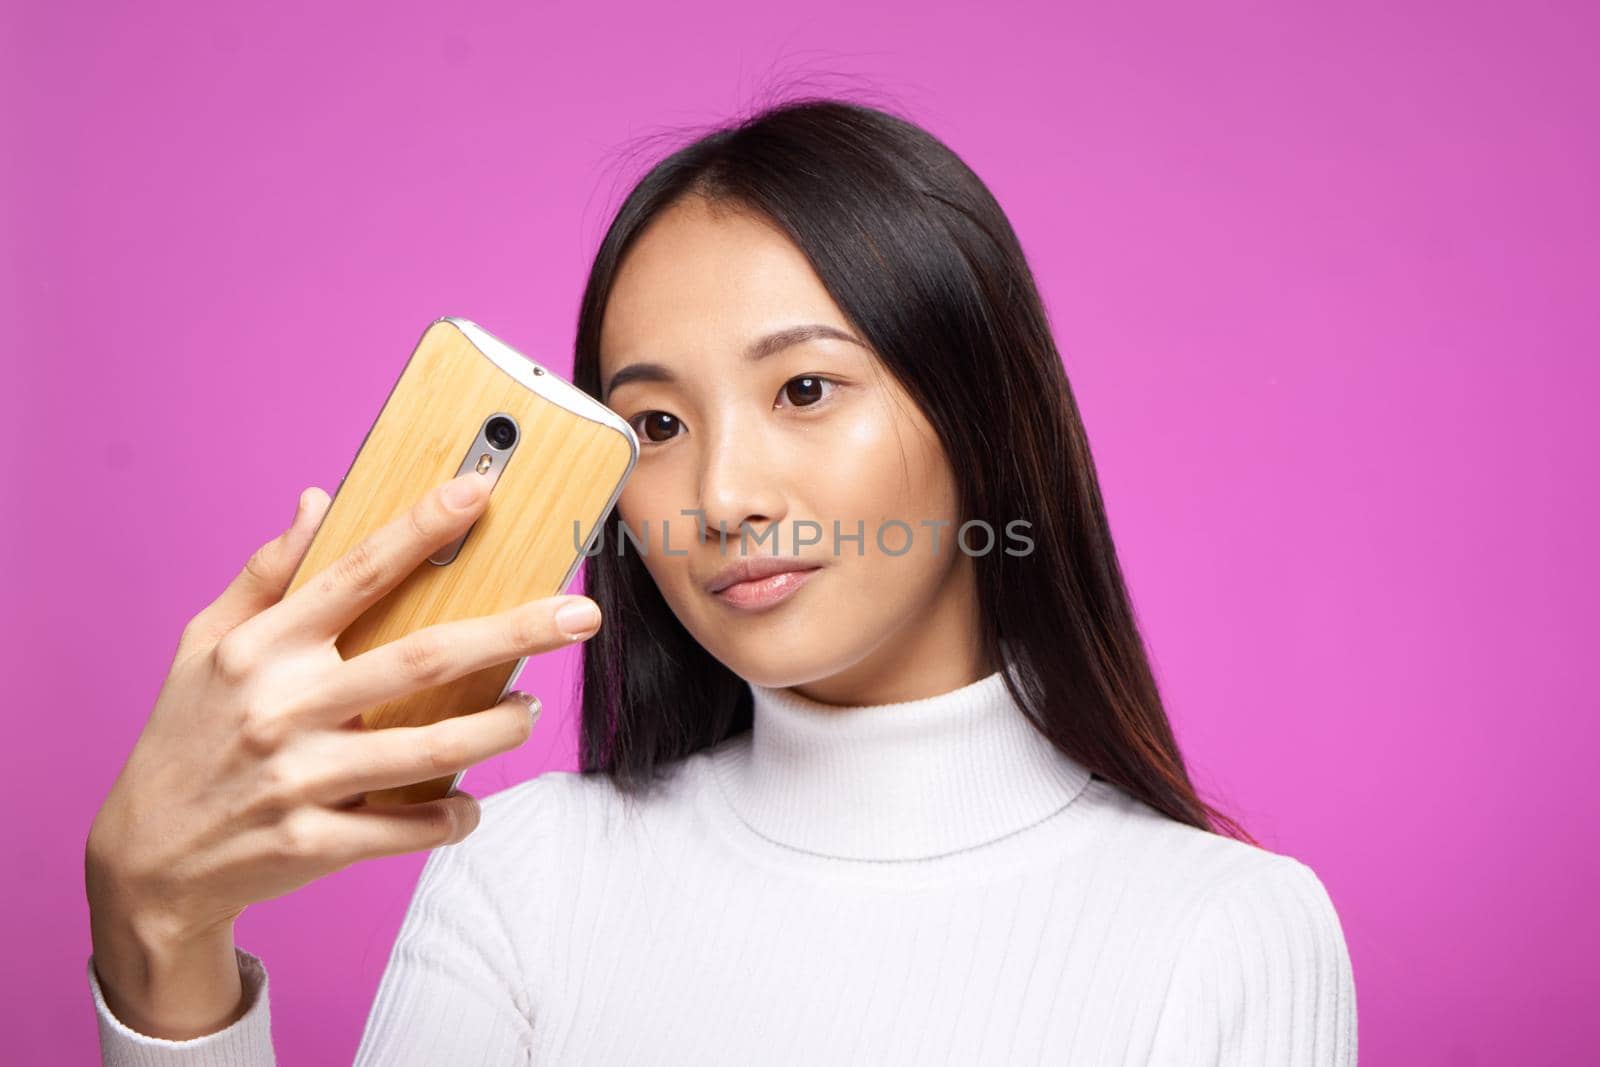 cute asian appearance phone in hand internet communication technology pink background. High quality photo